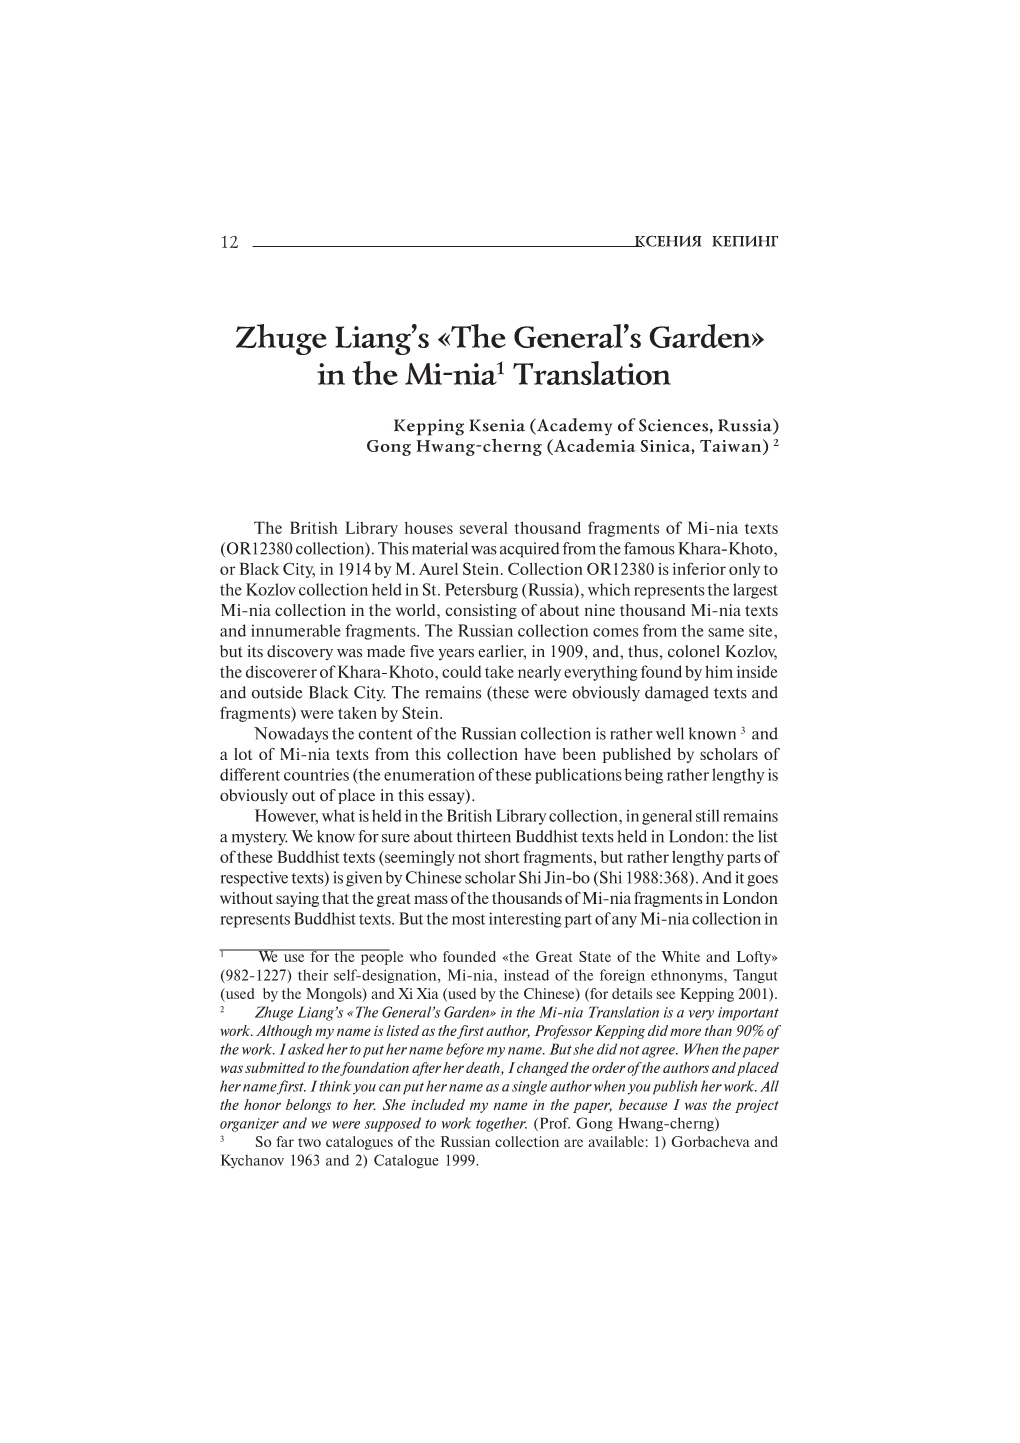 Zhuge Liang's "The General's Garden" in the Mi-Nia Translation